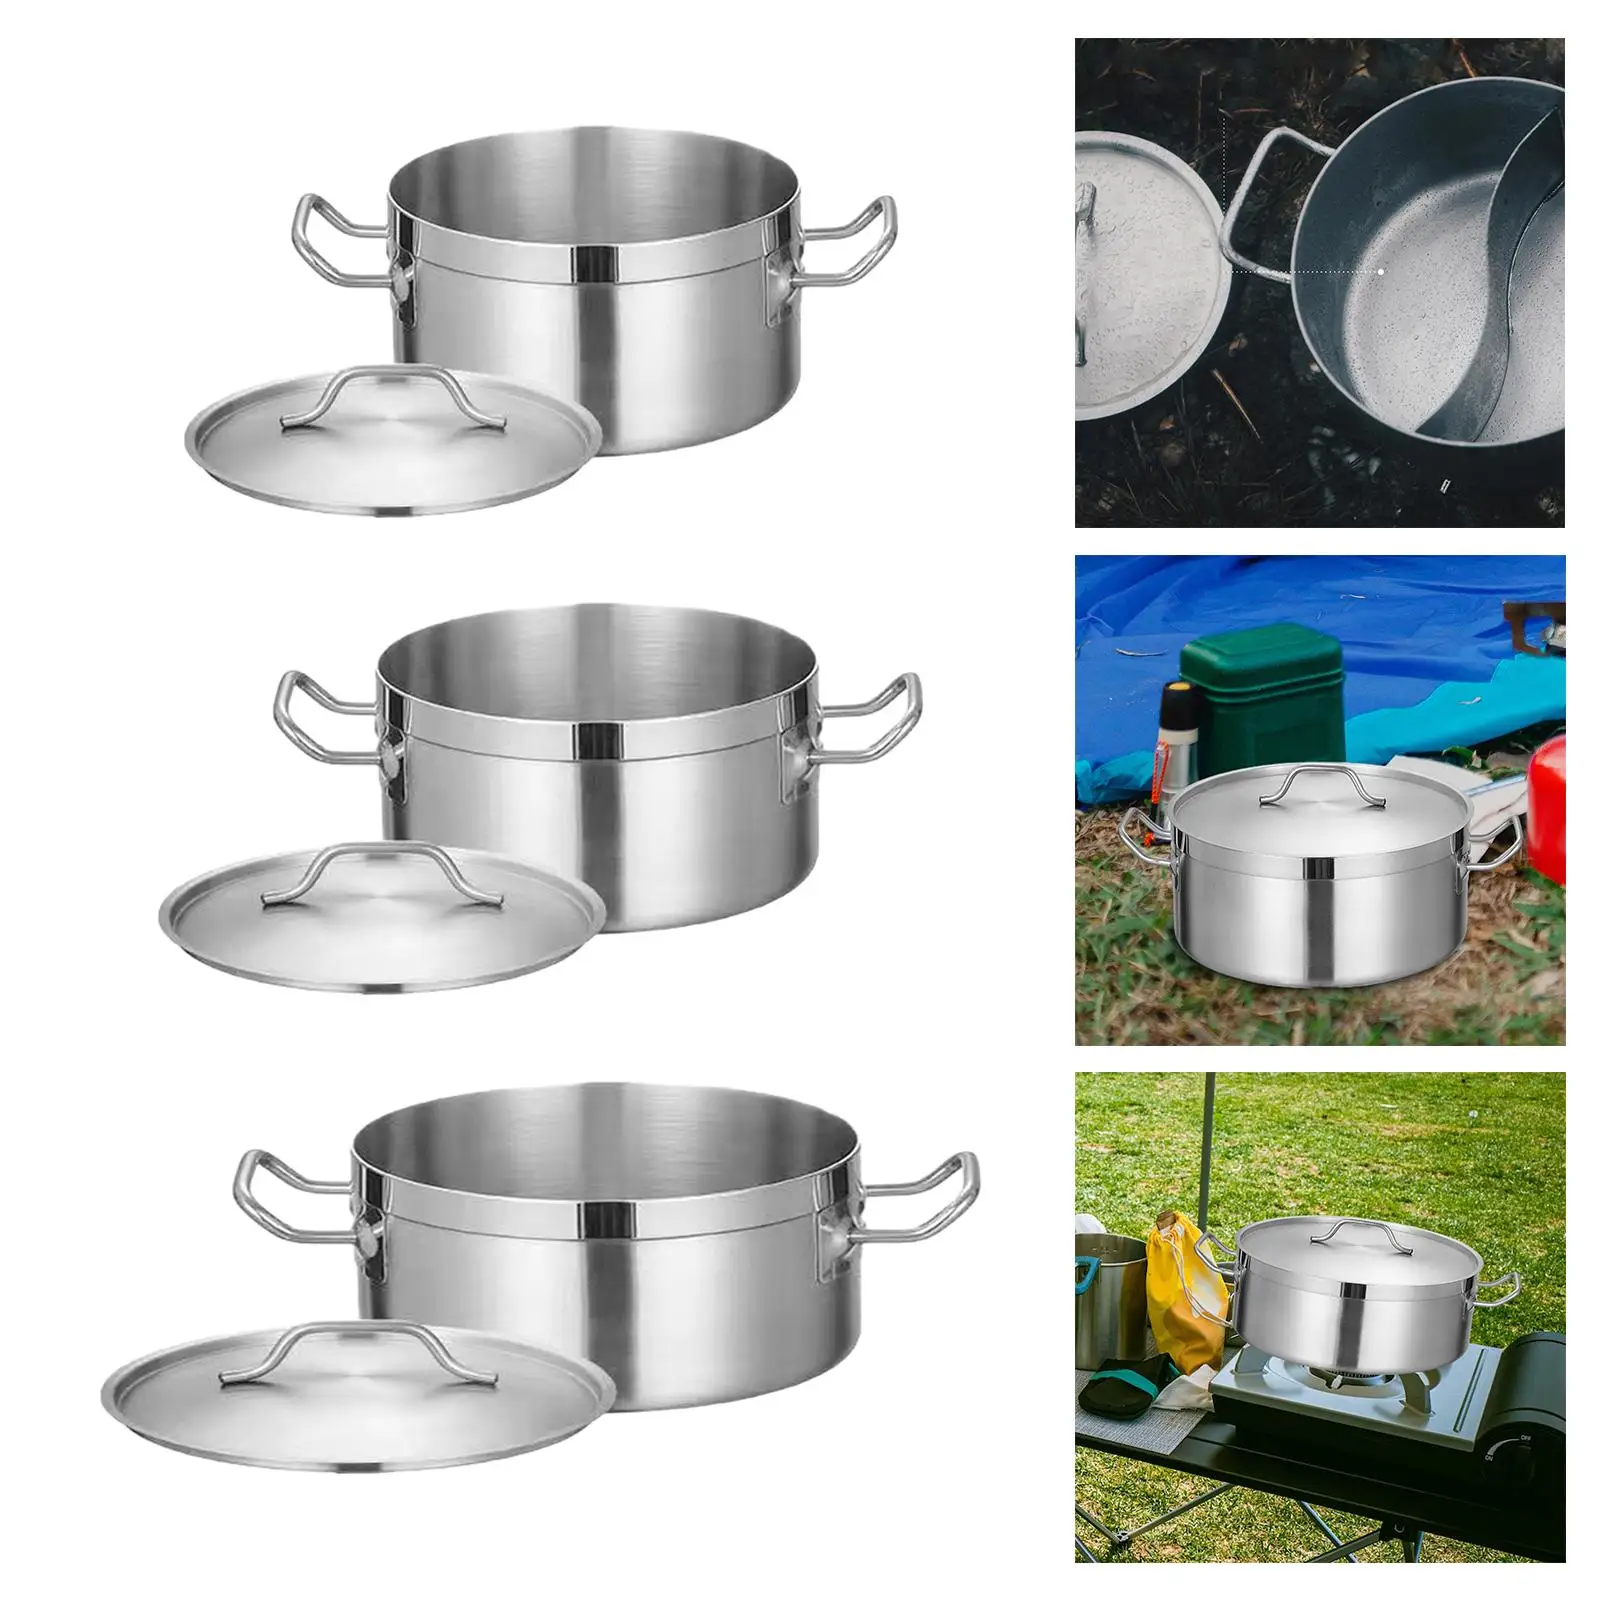 Stainless Steel Stockpot Cookware Heavy Duty Multipurpose Induction Stockpot Soup Pot for Kitchen Outdoor Camping Household